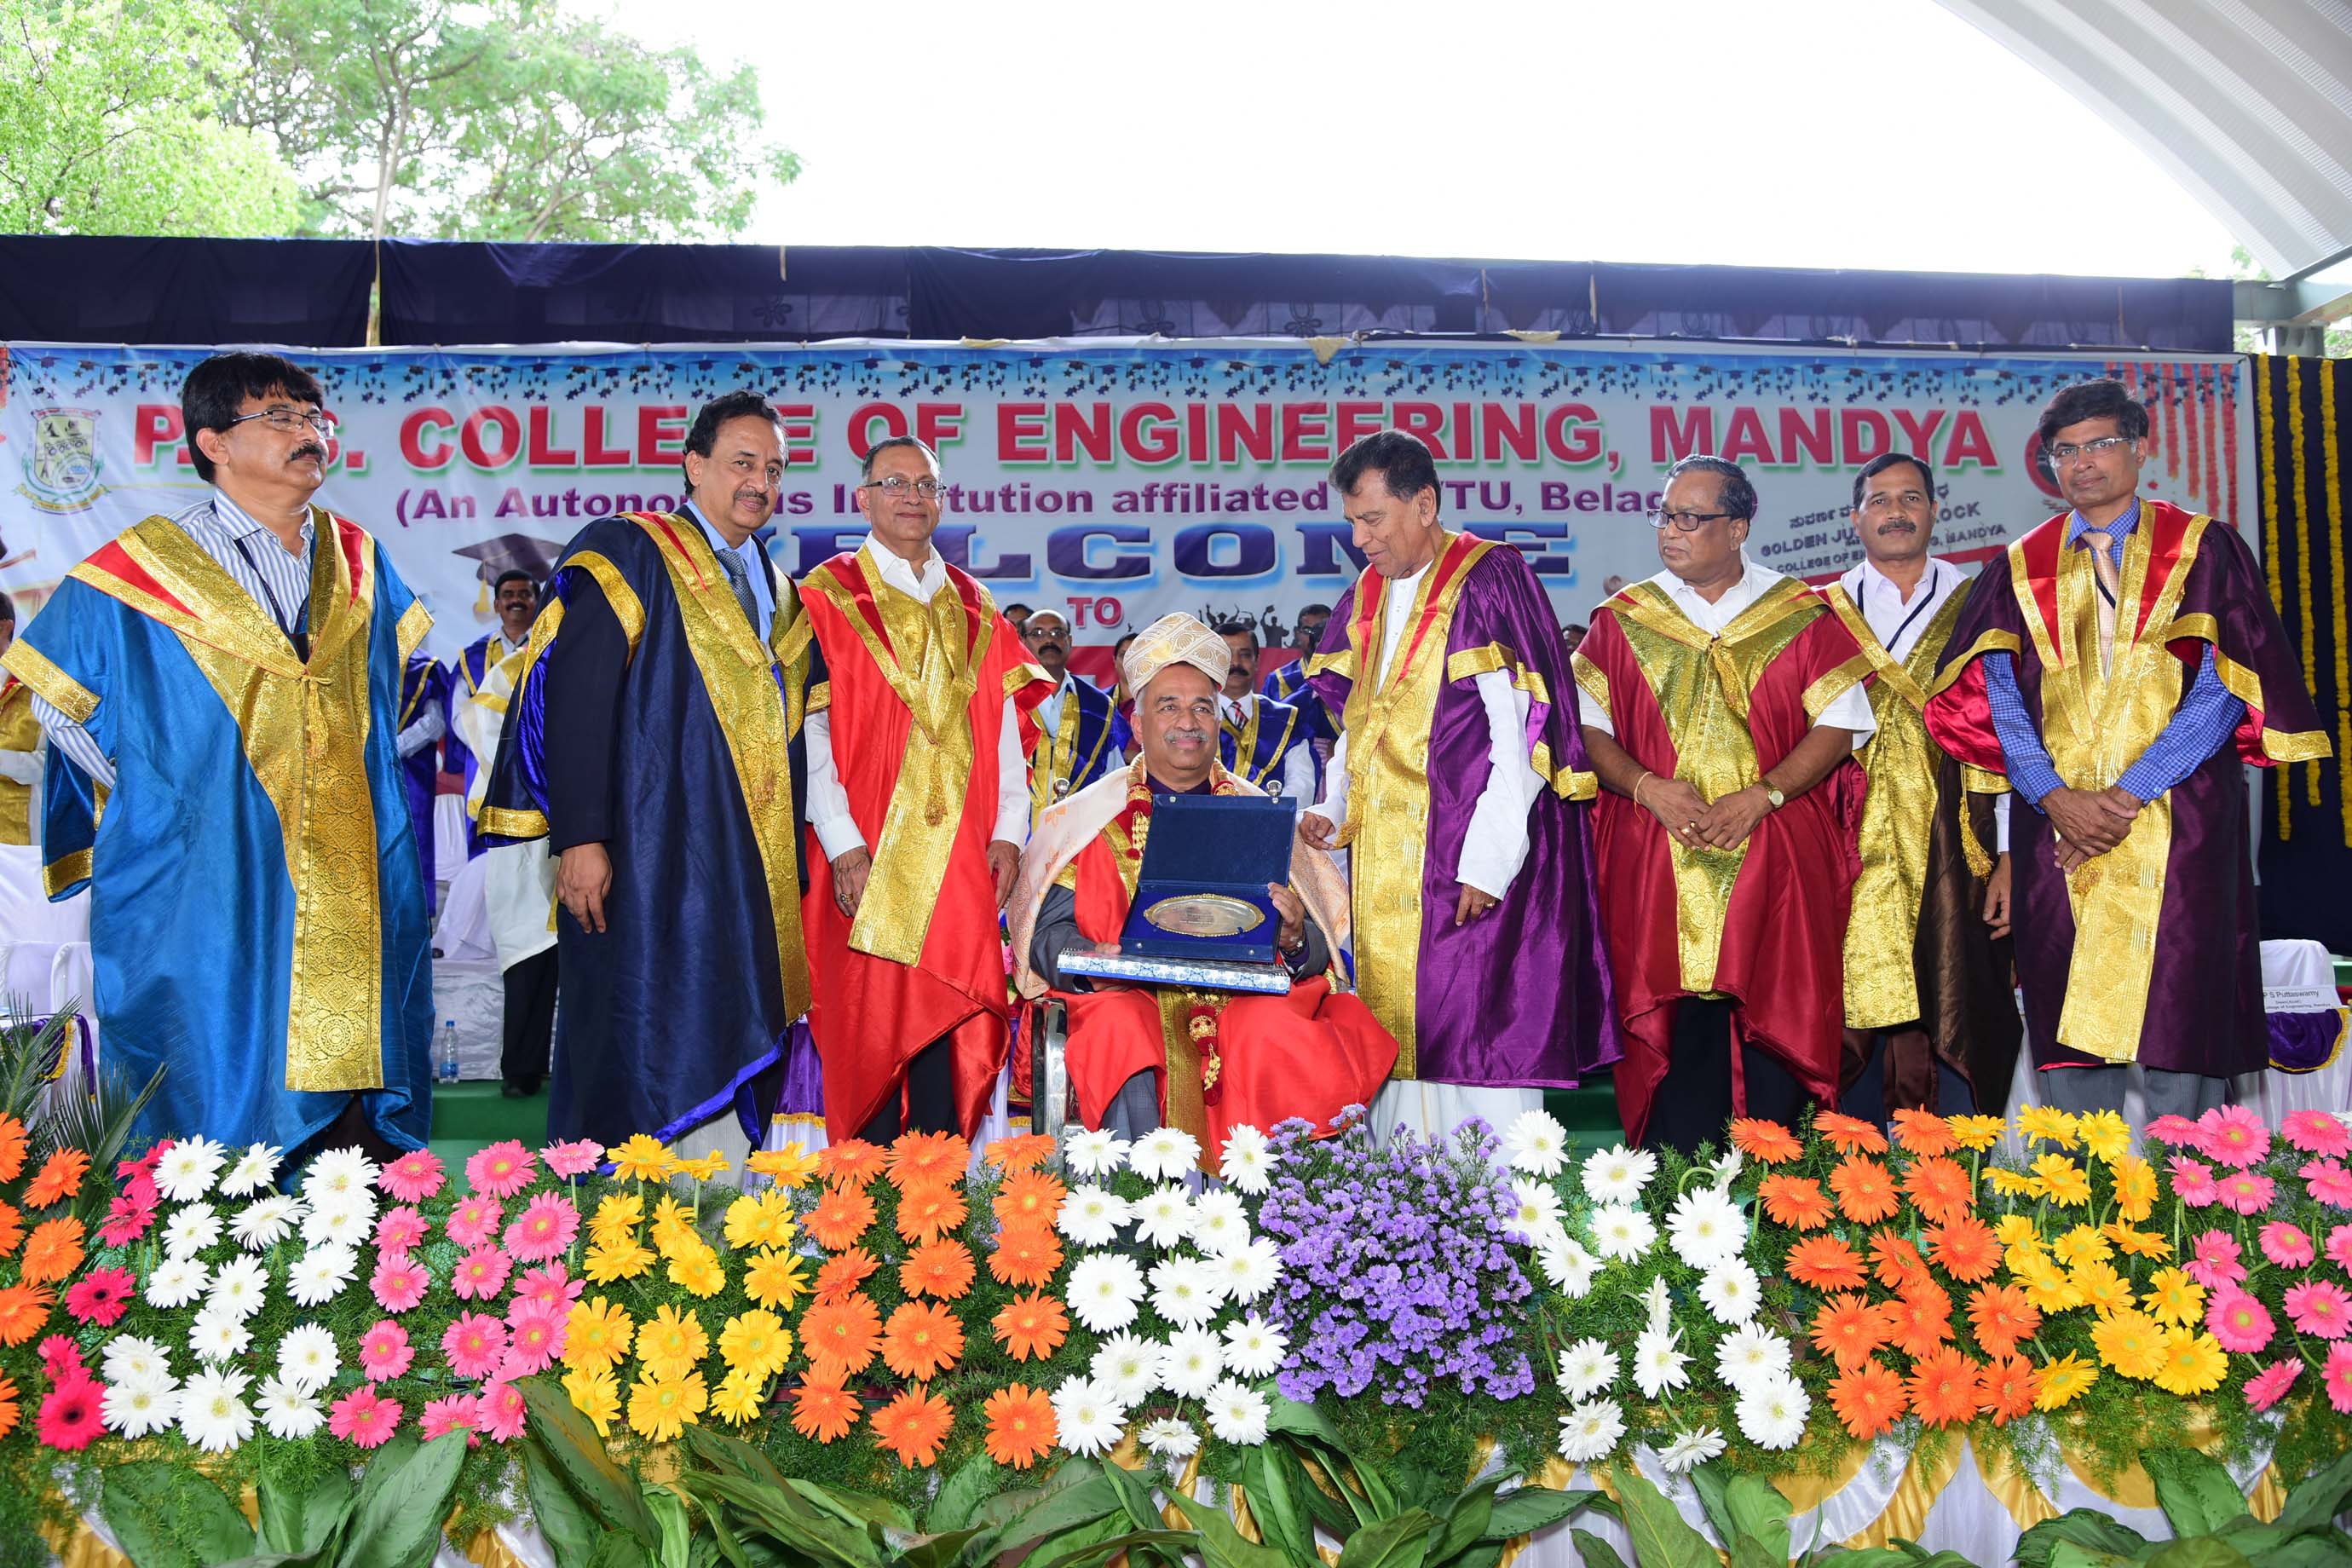 DEPARTMENT OF INFORMATION SCIENCE ENGG